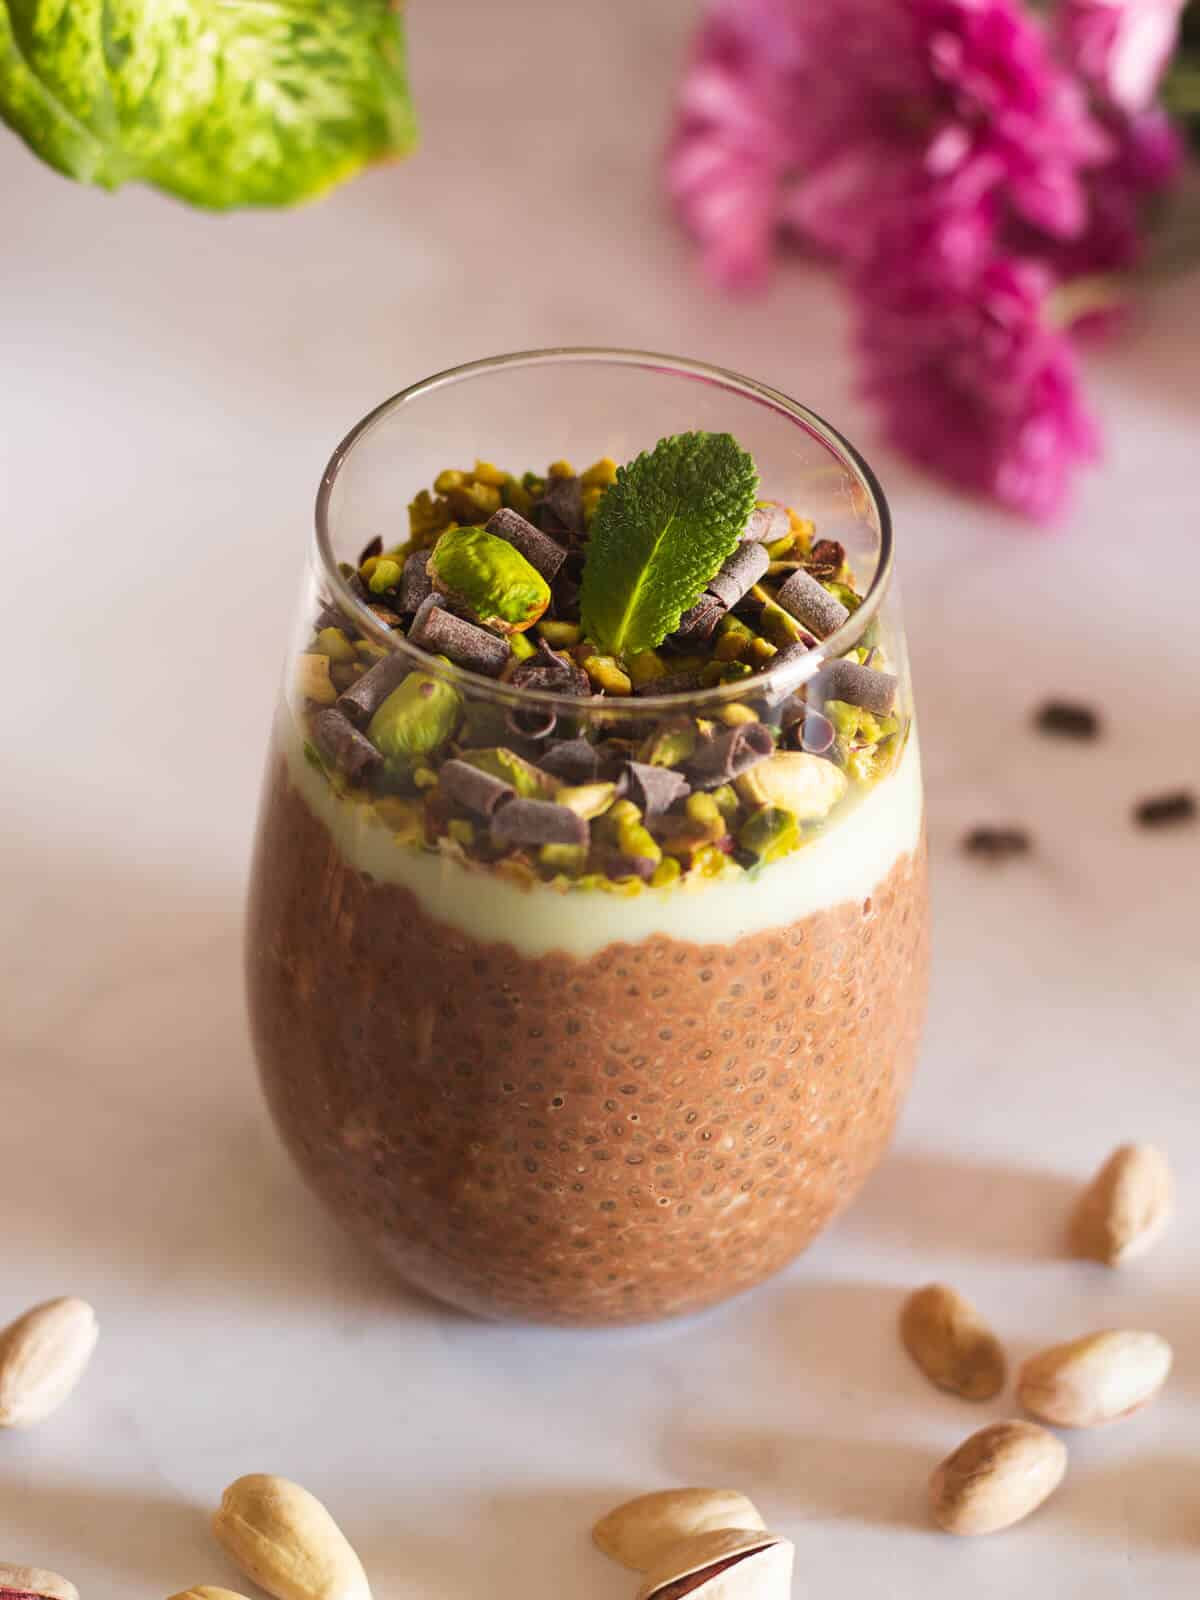 cocoa chia pudding with pistachio, chocolate and mint leaves